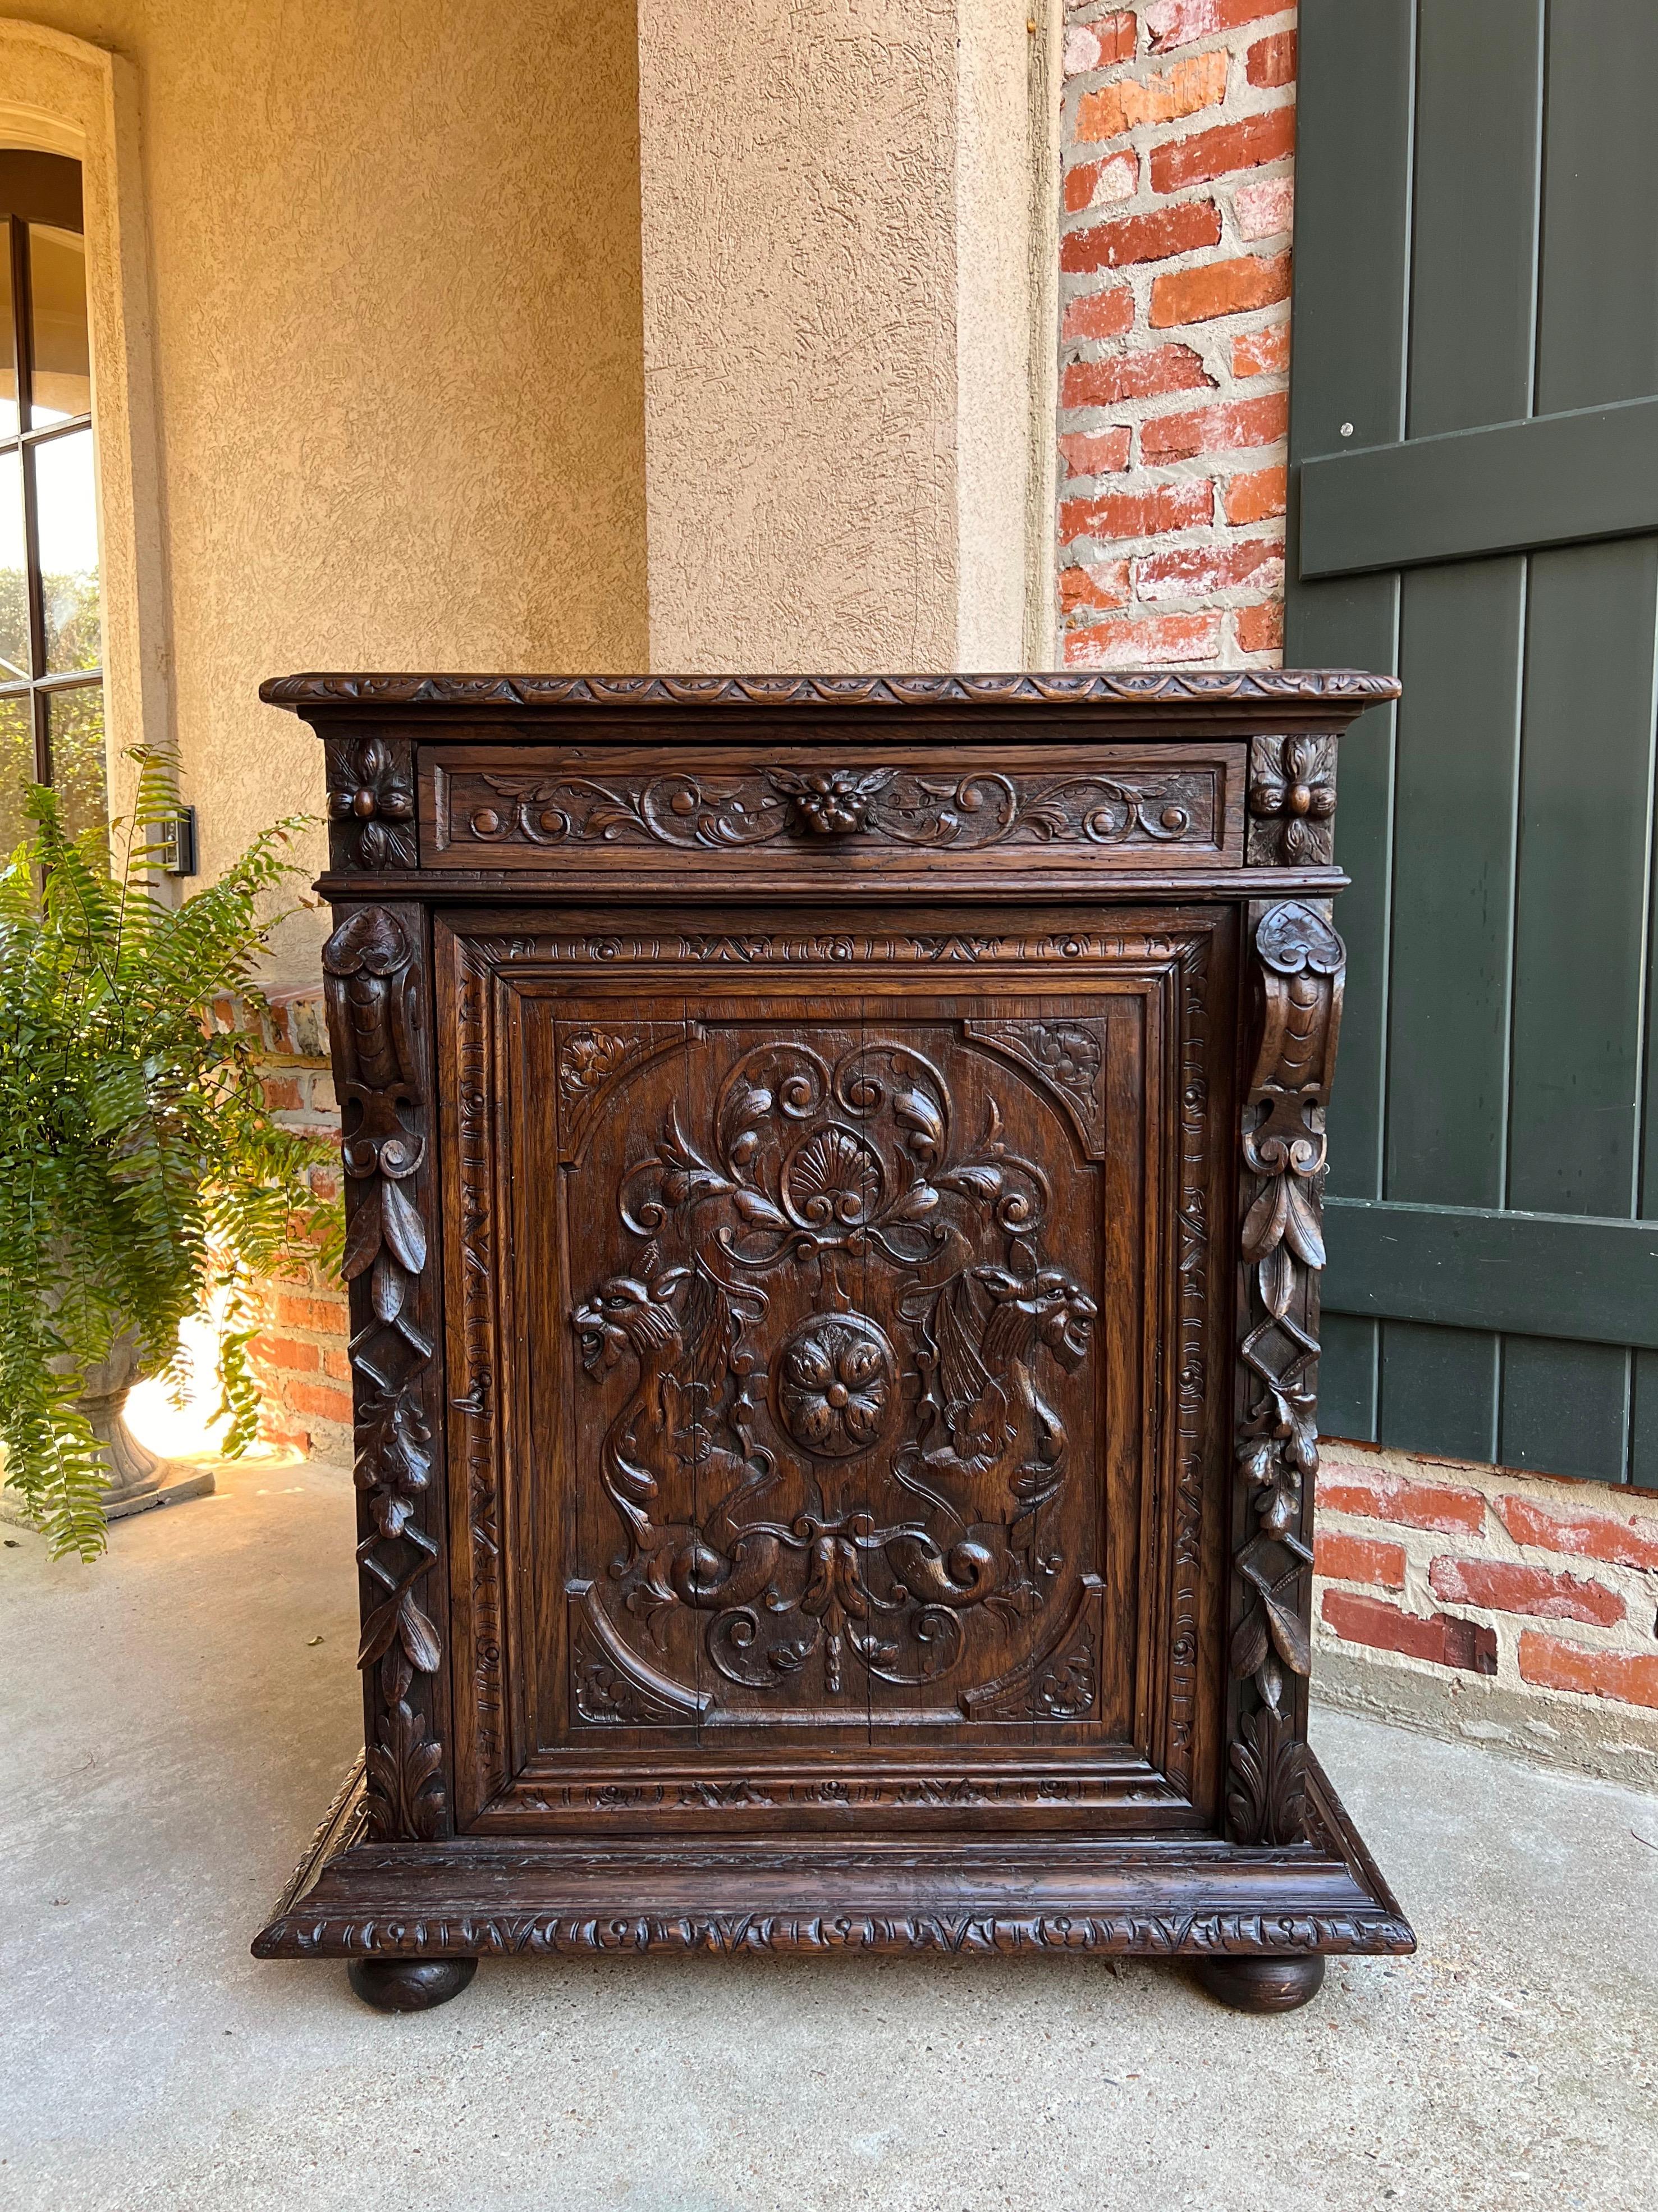 19th century French carved oak hunt cabinet confiturier renaissance 

Directly imported from France, a beautifully hand carved 19th century French confiturier cabinet.
Carved beveled edge cabinet top over the carved frieze that features a full